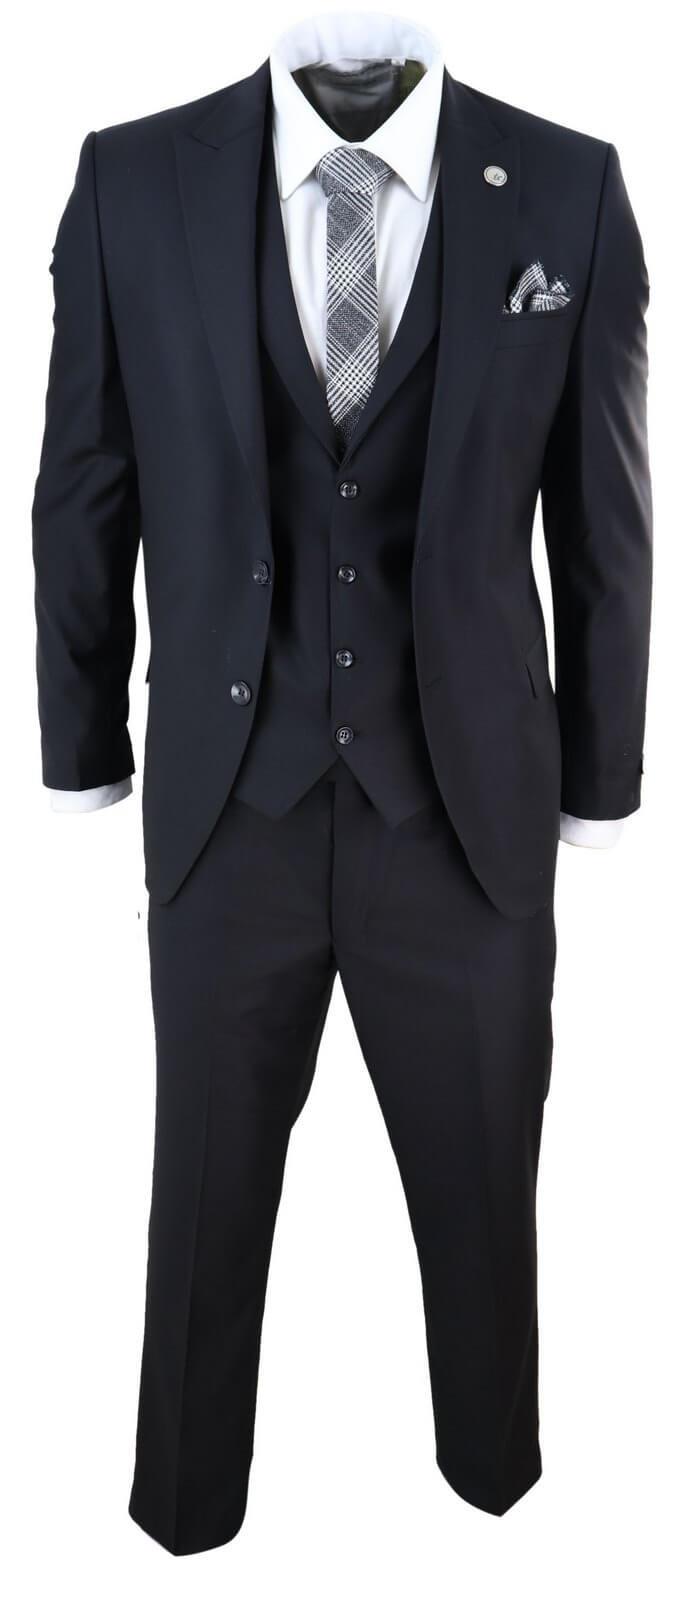 New Mens 3 Piece Suit Plain Black Classic Tailored Fit Smart Casual 1920s Formal - Upperclass Fashions 